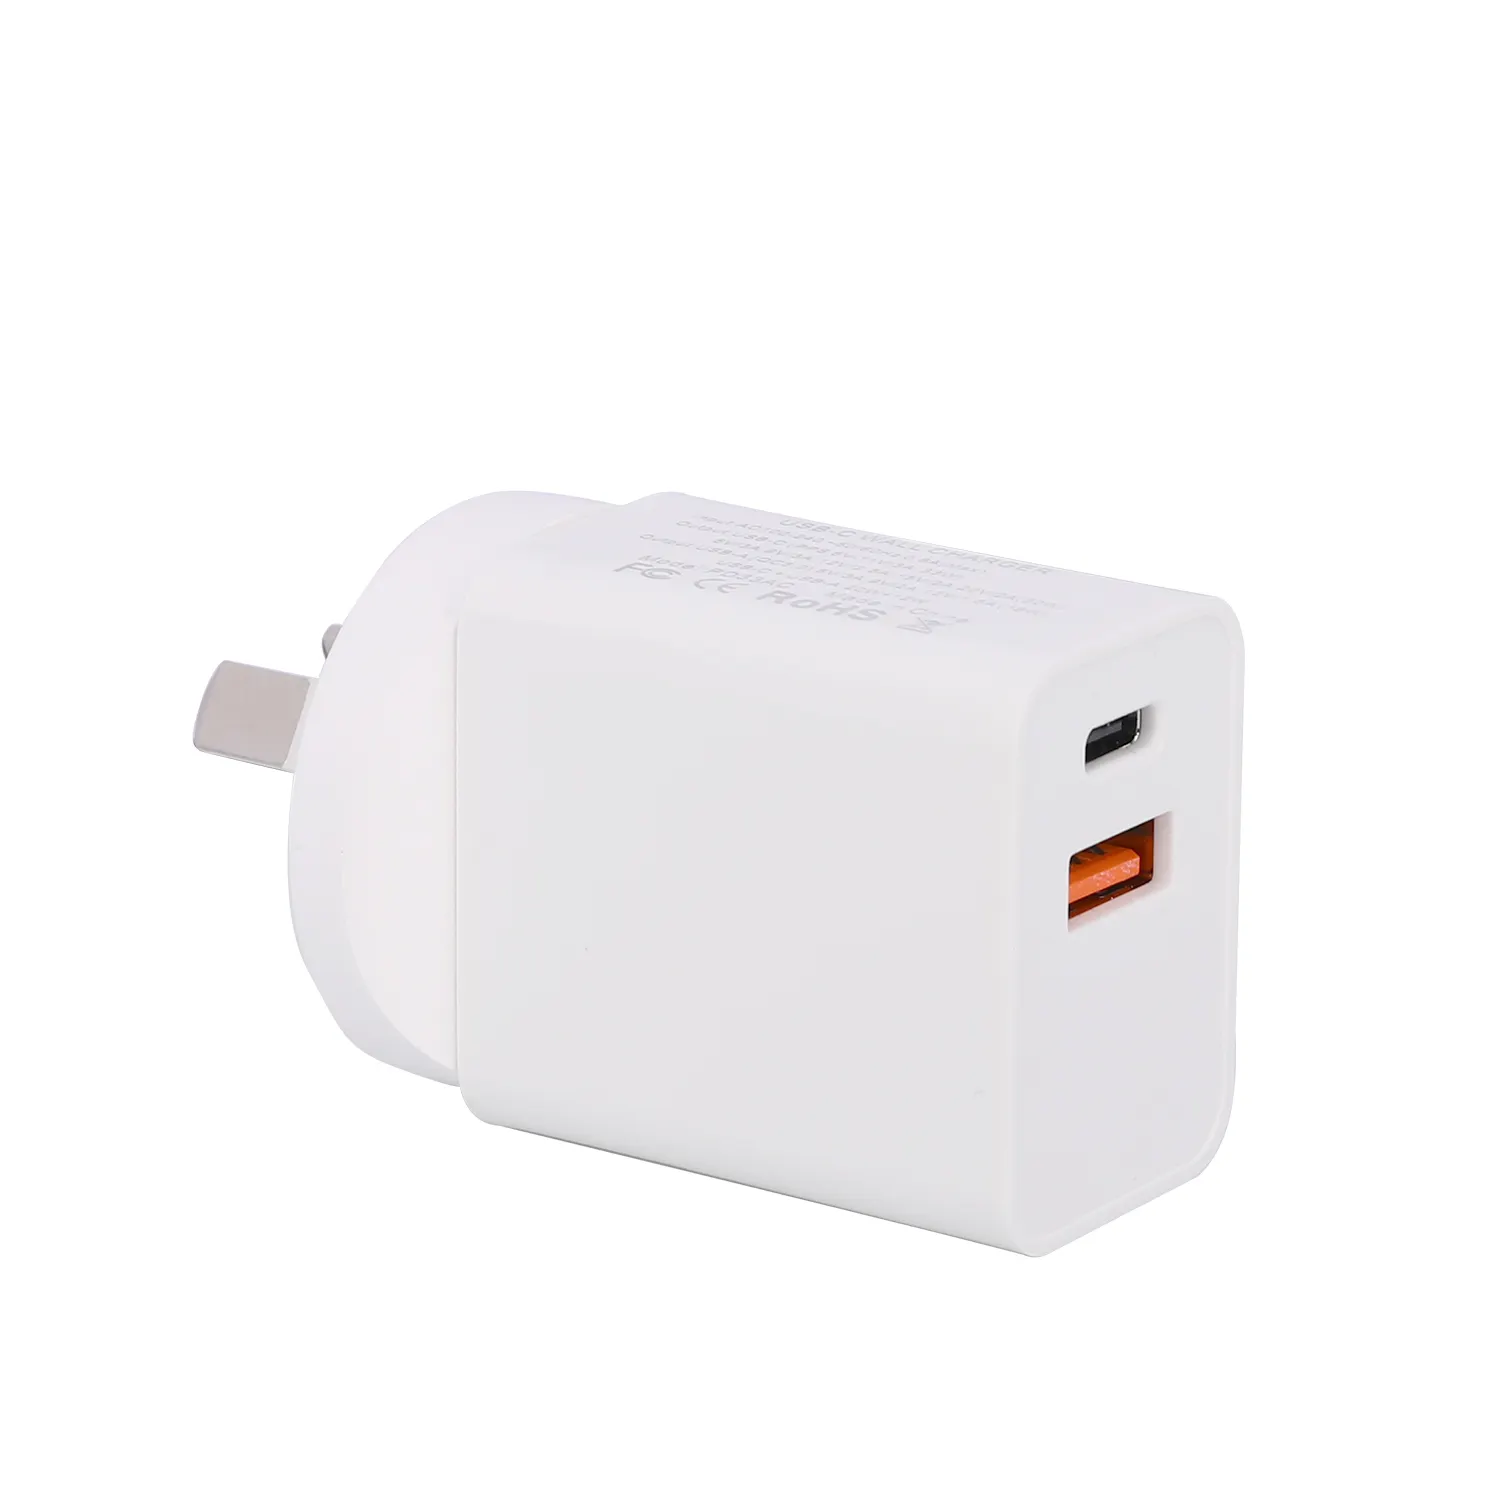 USB Charger Quick Charge 3.0 33W fast charger For Xiaomi mi 10 9 8 samsung quick charger adapter qc 3.0 for mobile phone